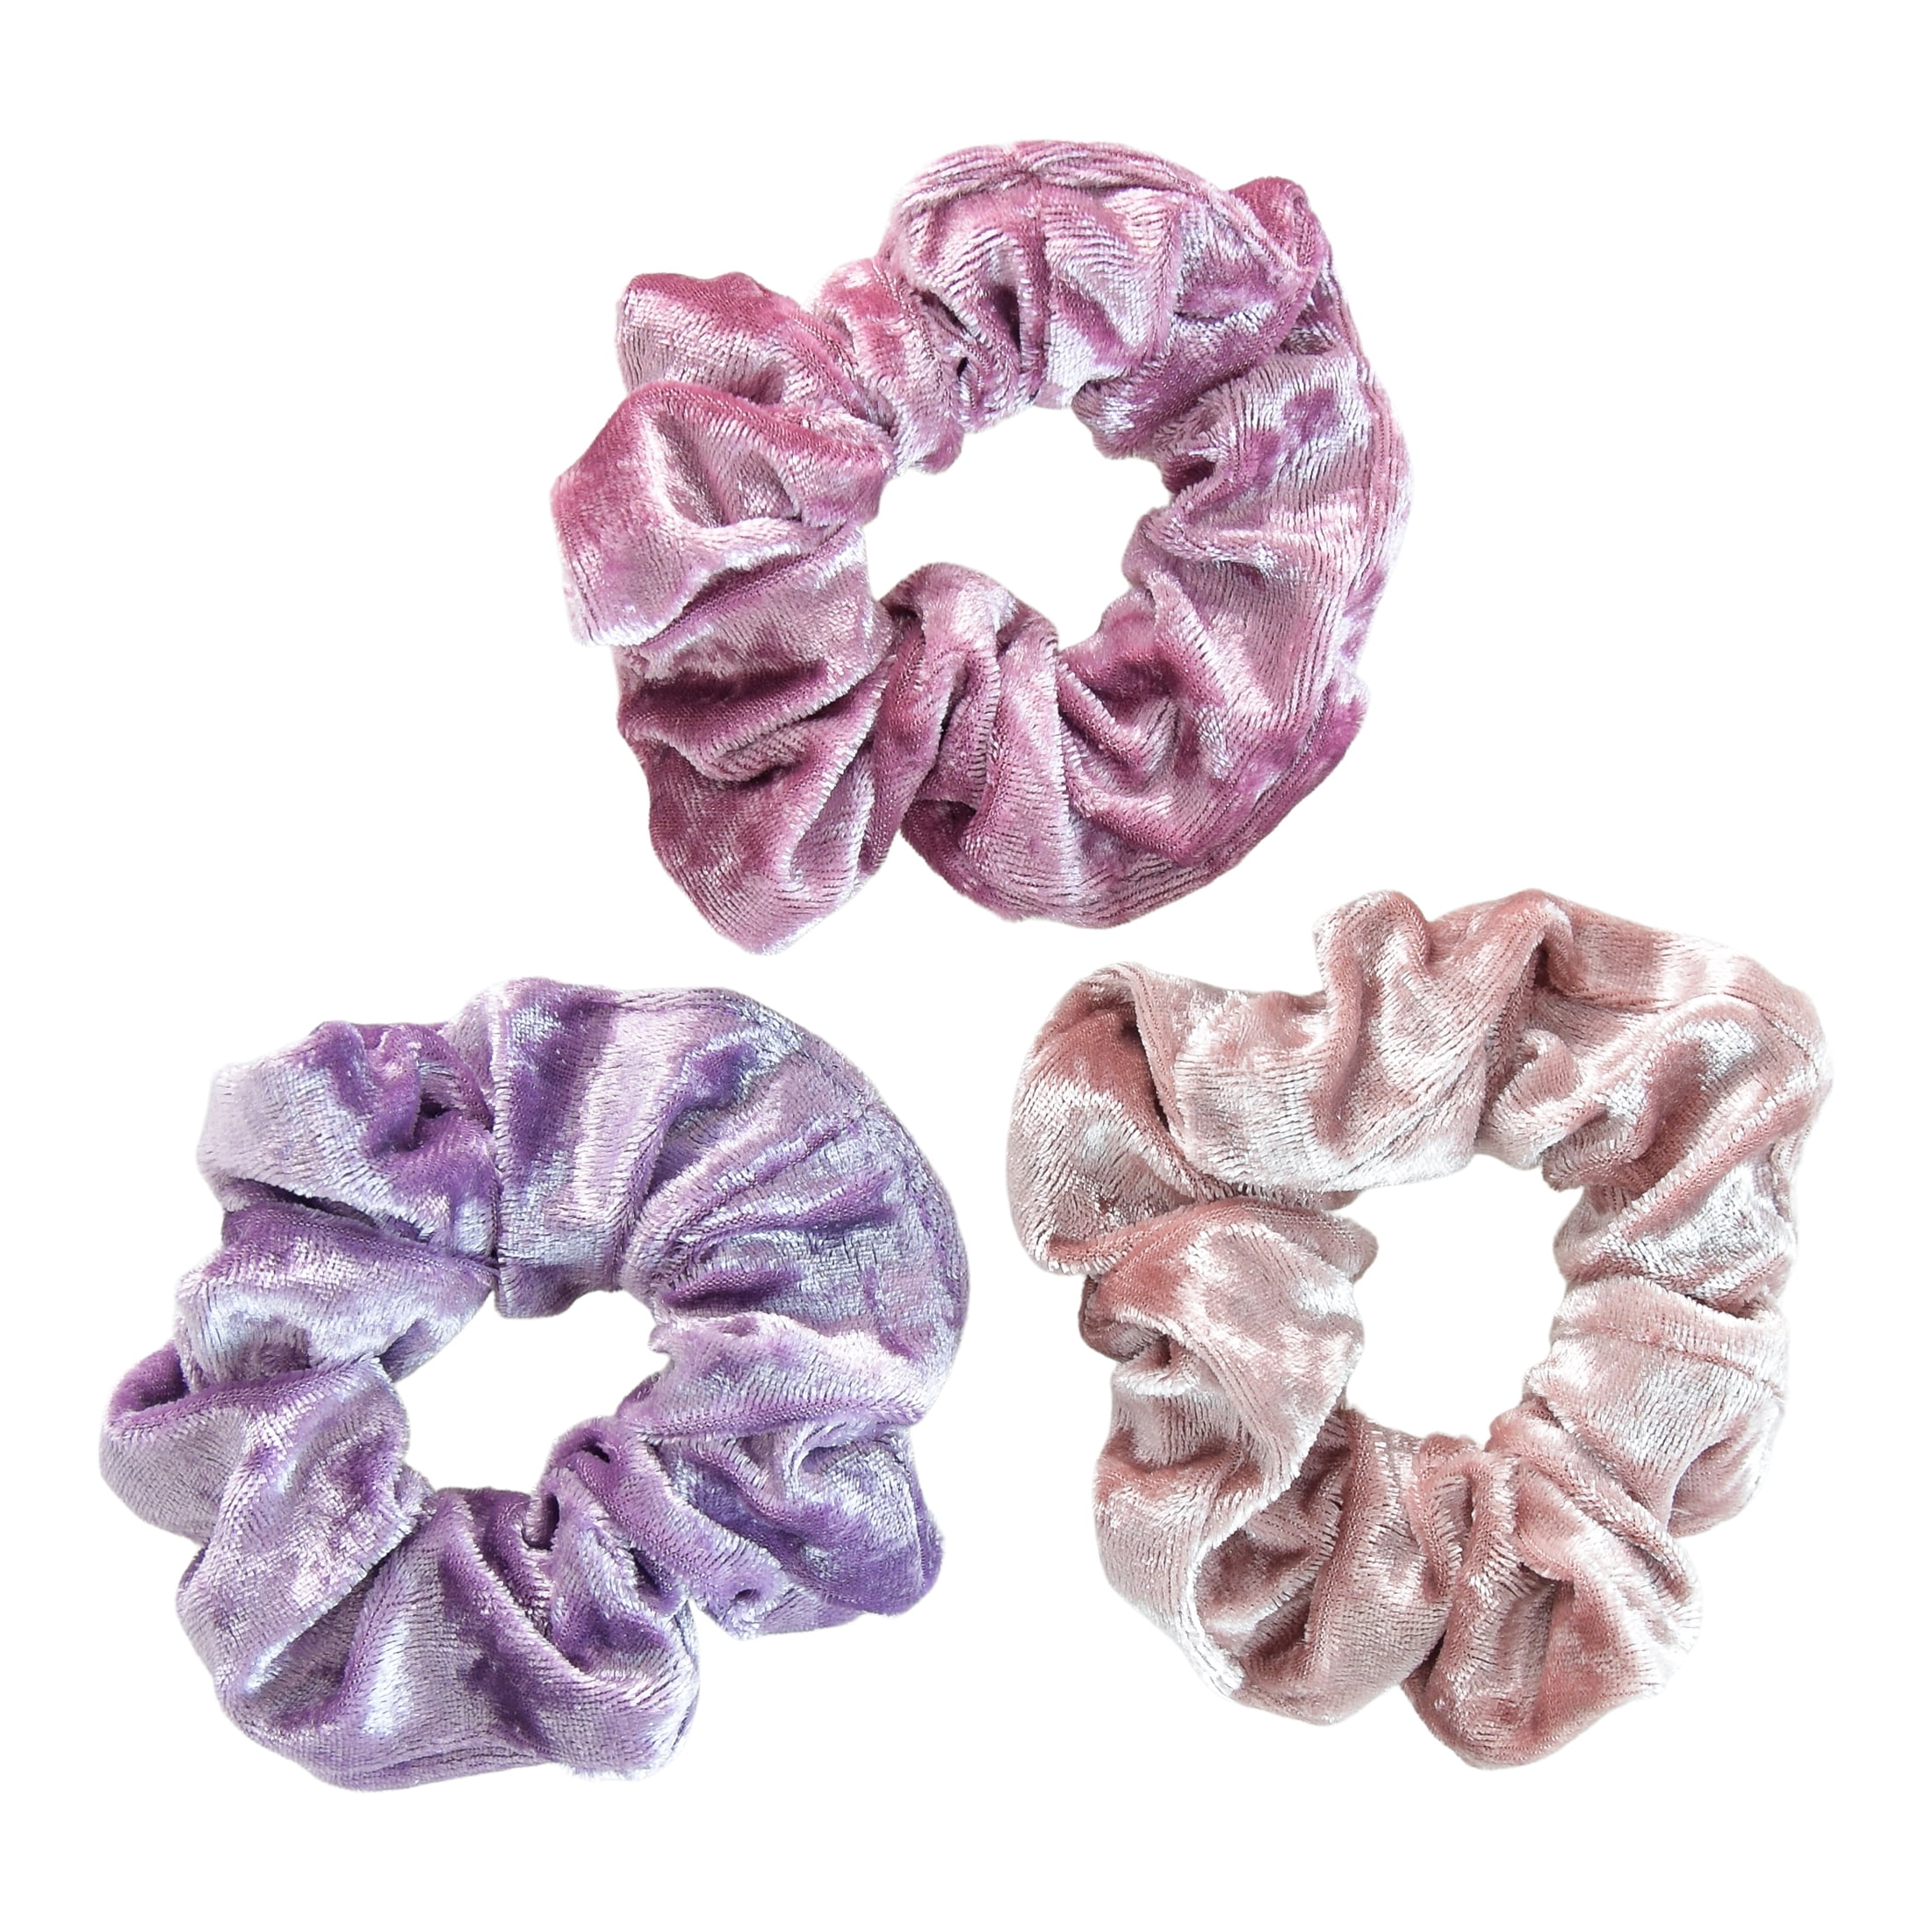 Top Quality Cotton Scrunchies with Small Star Pattern in Five Summer Colours 